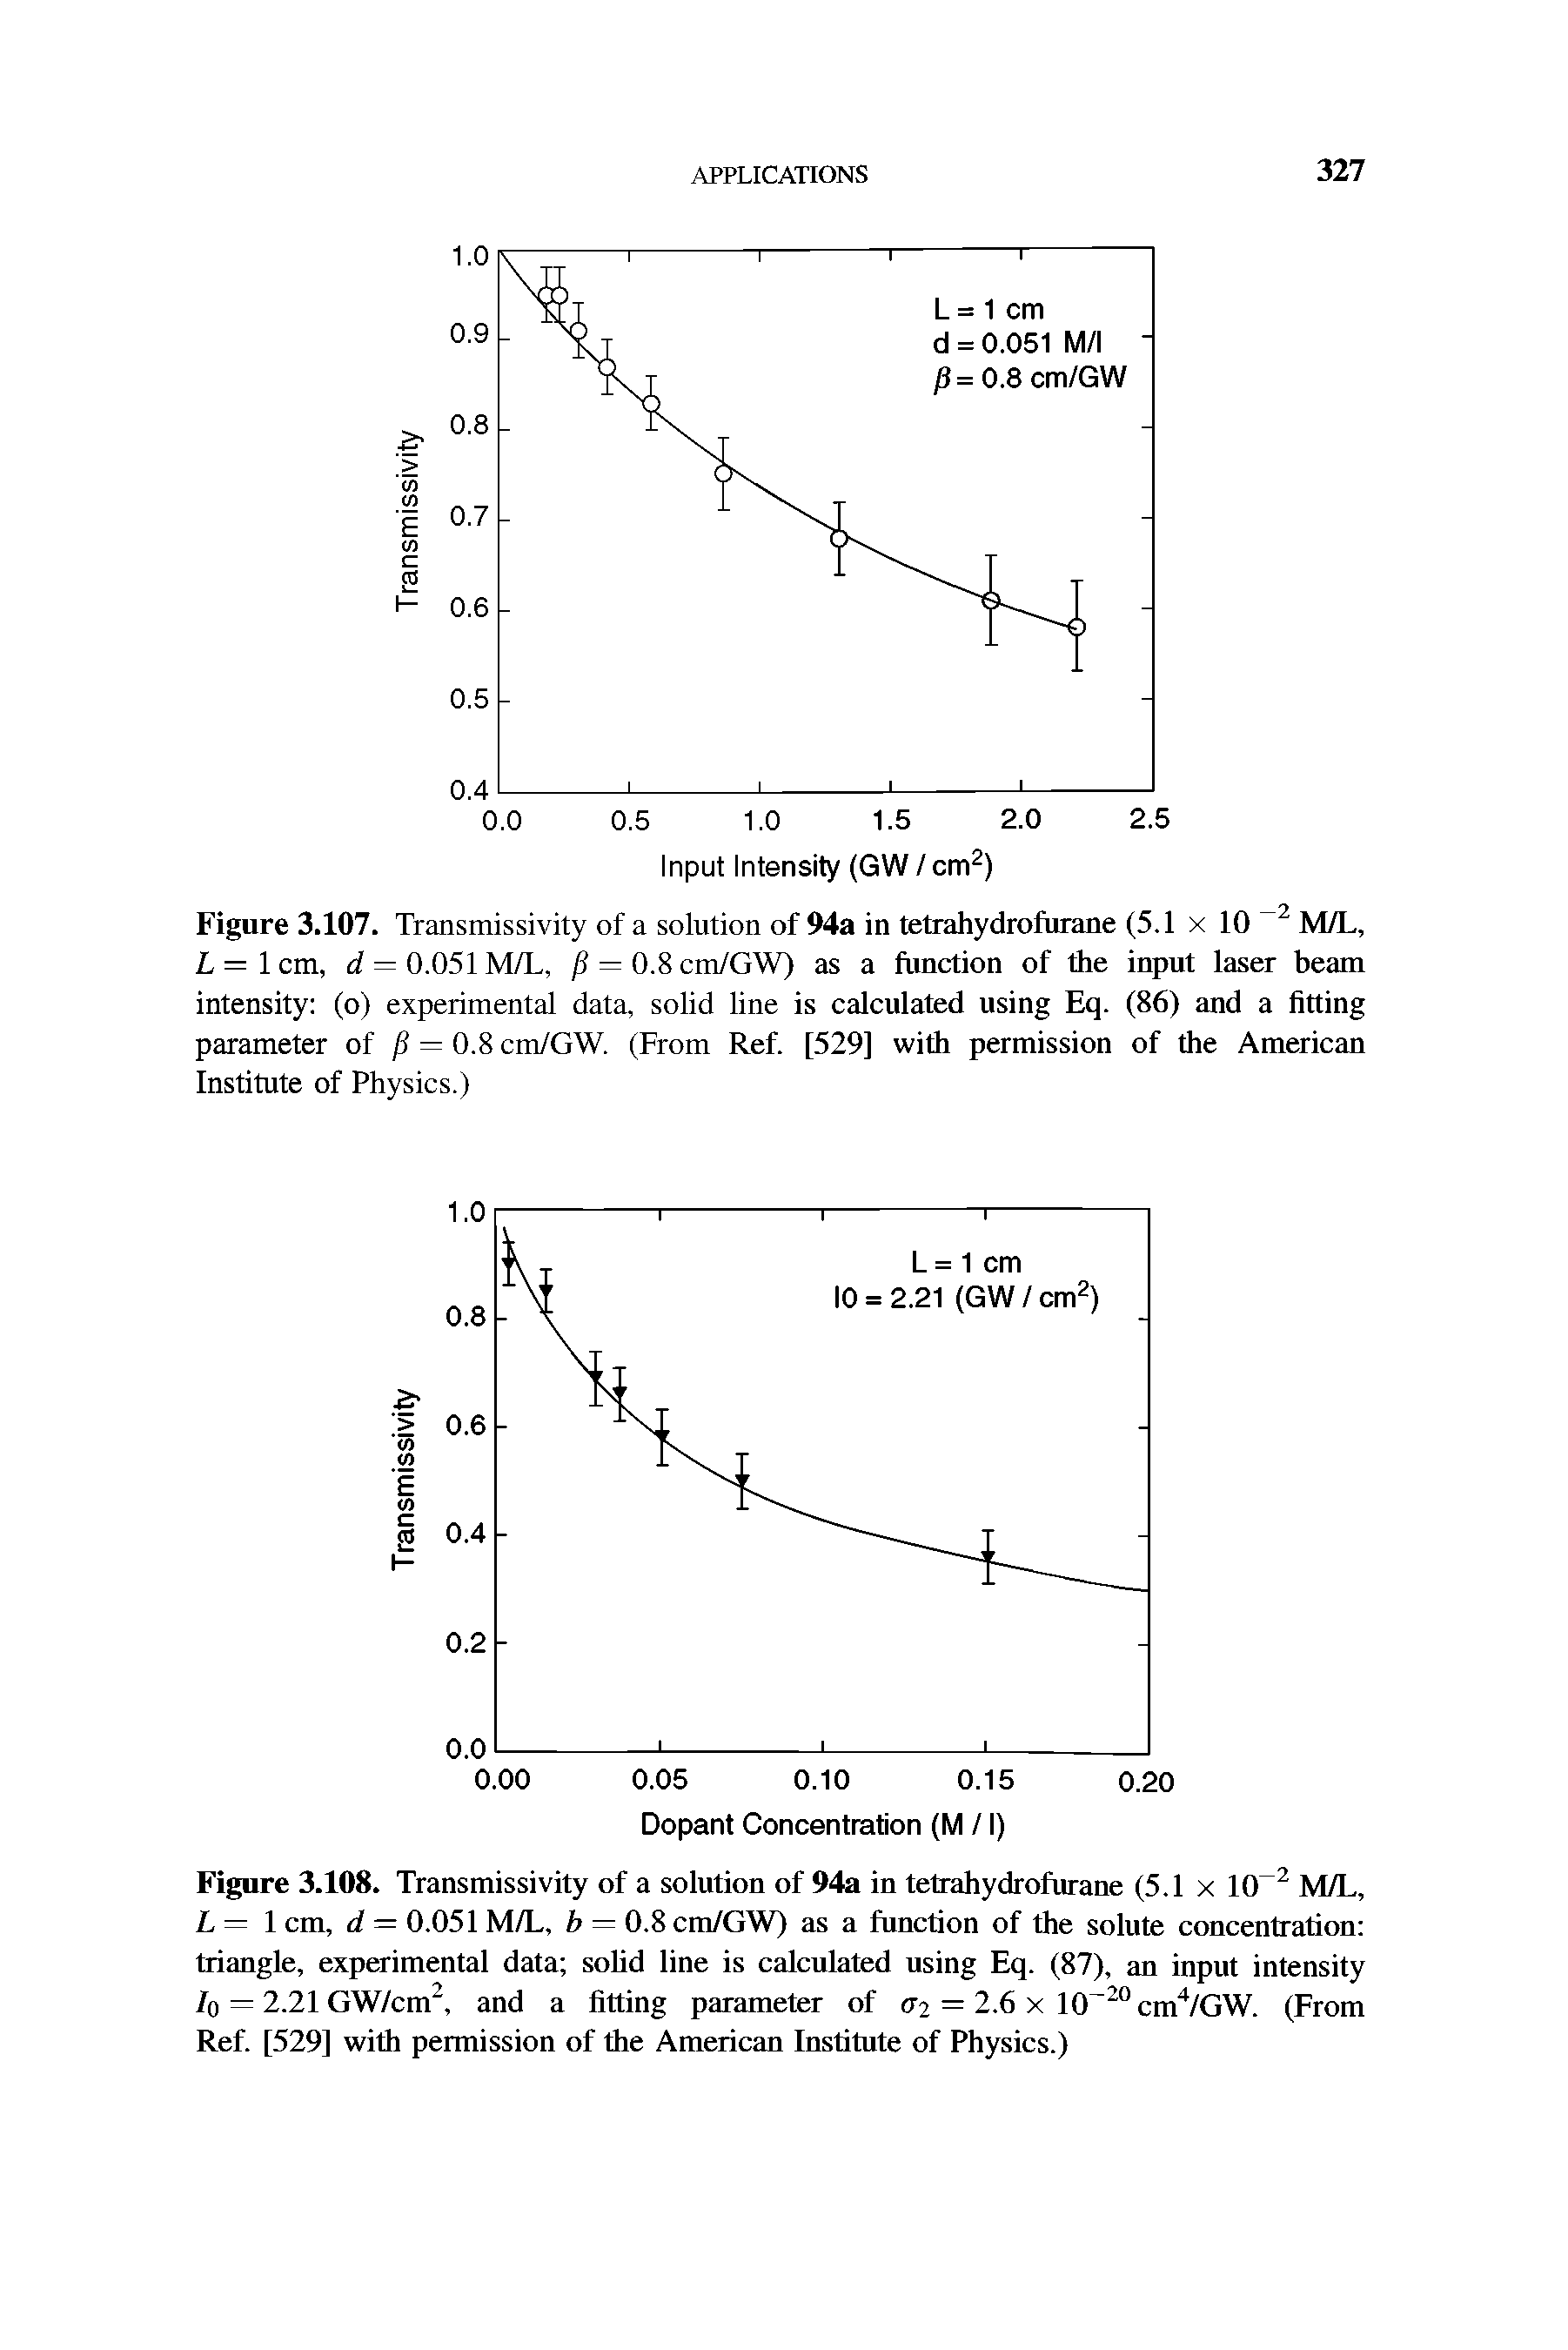 Figure 3.108. Transmissivity of a solution of 94a in tetrahydrofurane (5.1 x 10 2 M/L, L— 1 cm, d = 0.051 M/L, b — 0.8 cm/GW) as a function of the solute concentration triangle, experimental data solid line is calculated using Eq. (87), an input intensity /(I — 2.21 GW/cm2, and a fitting parameter of (7i = 2.6 x 10 2<lcm4/GW. (From Ref. [529] with permission of the American Institute of Physics.)...